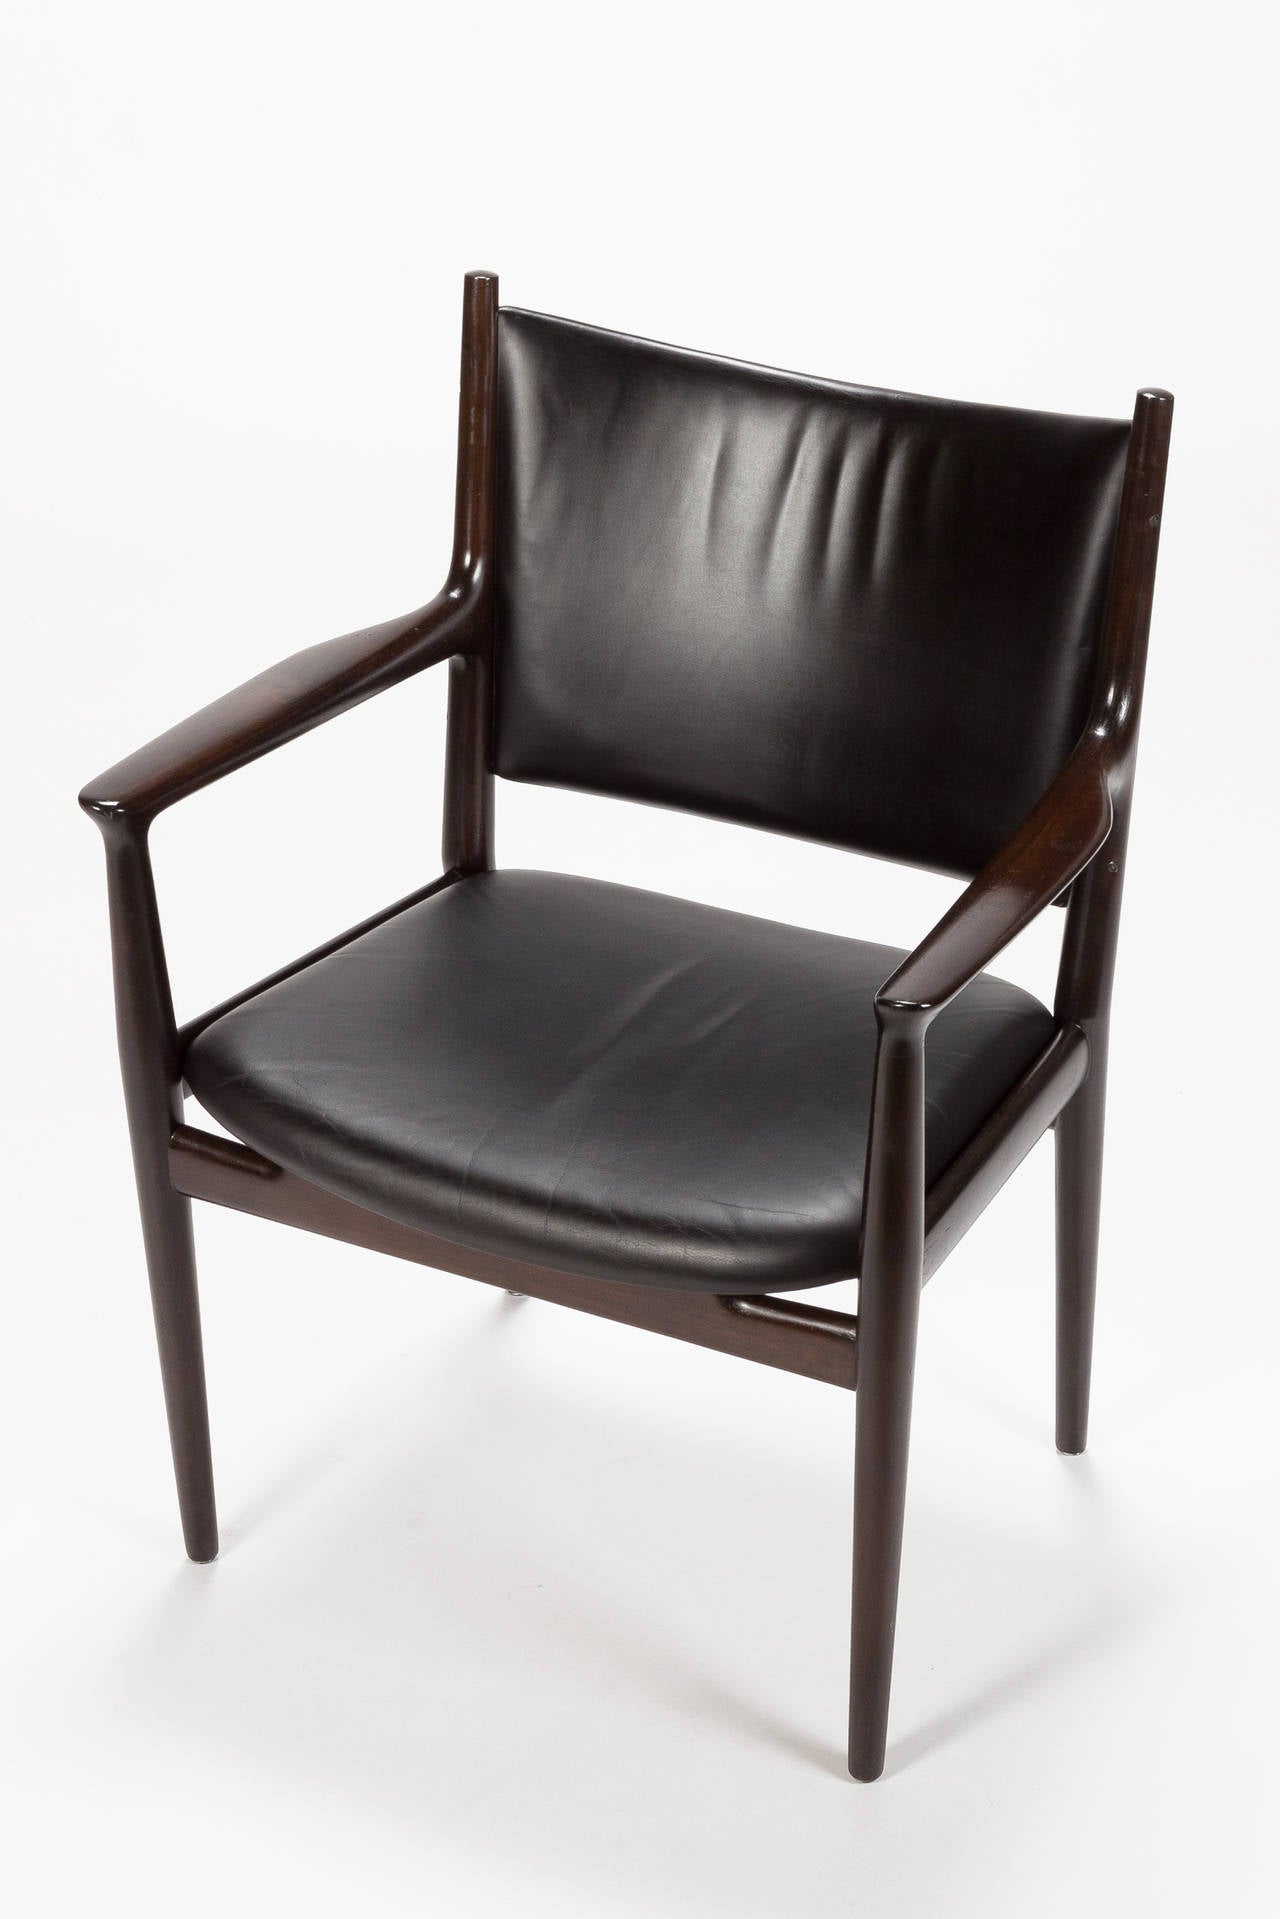 Mid-20th Century Pair of Conference Chairs JH-713 by Hans Wegner